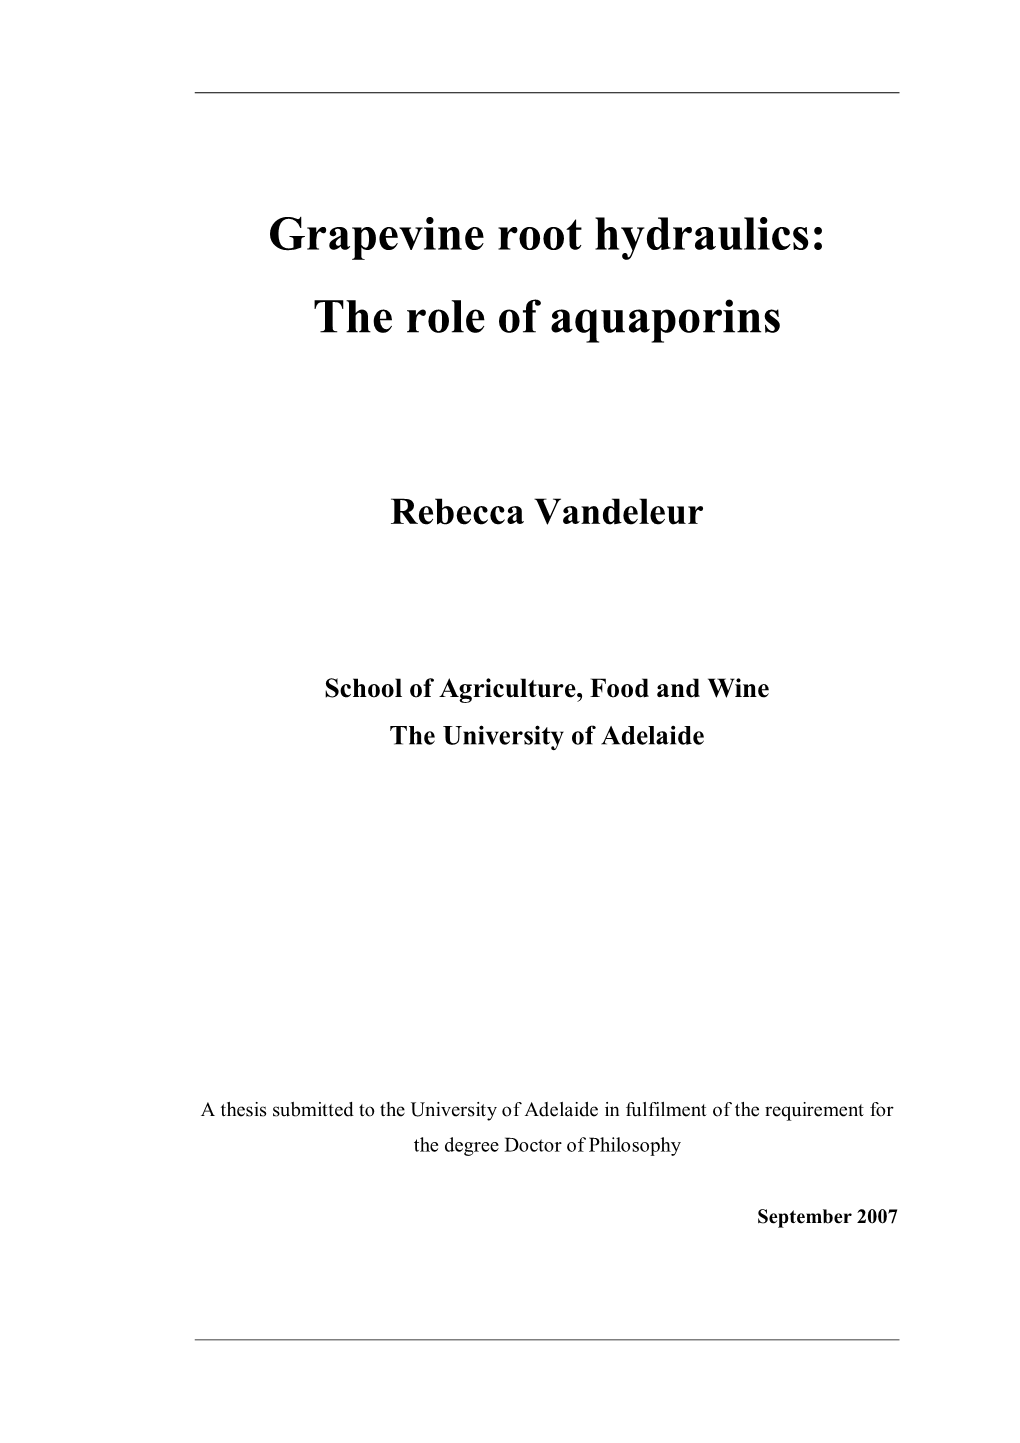 Grapevine Root Hydraulics: the Role of Aquaporins